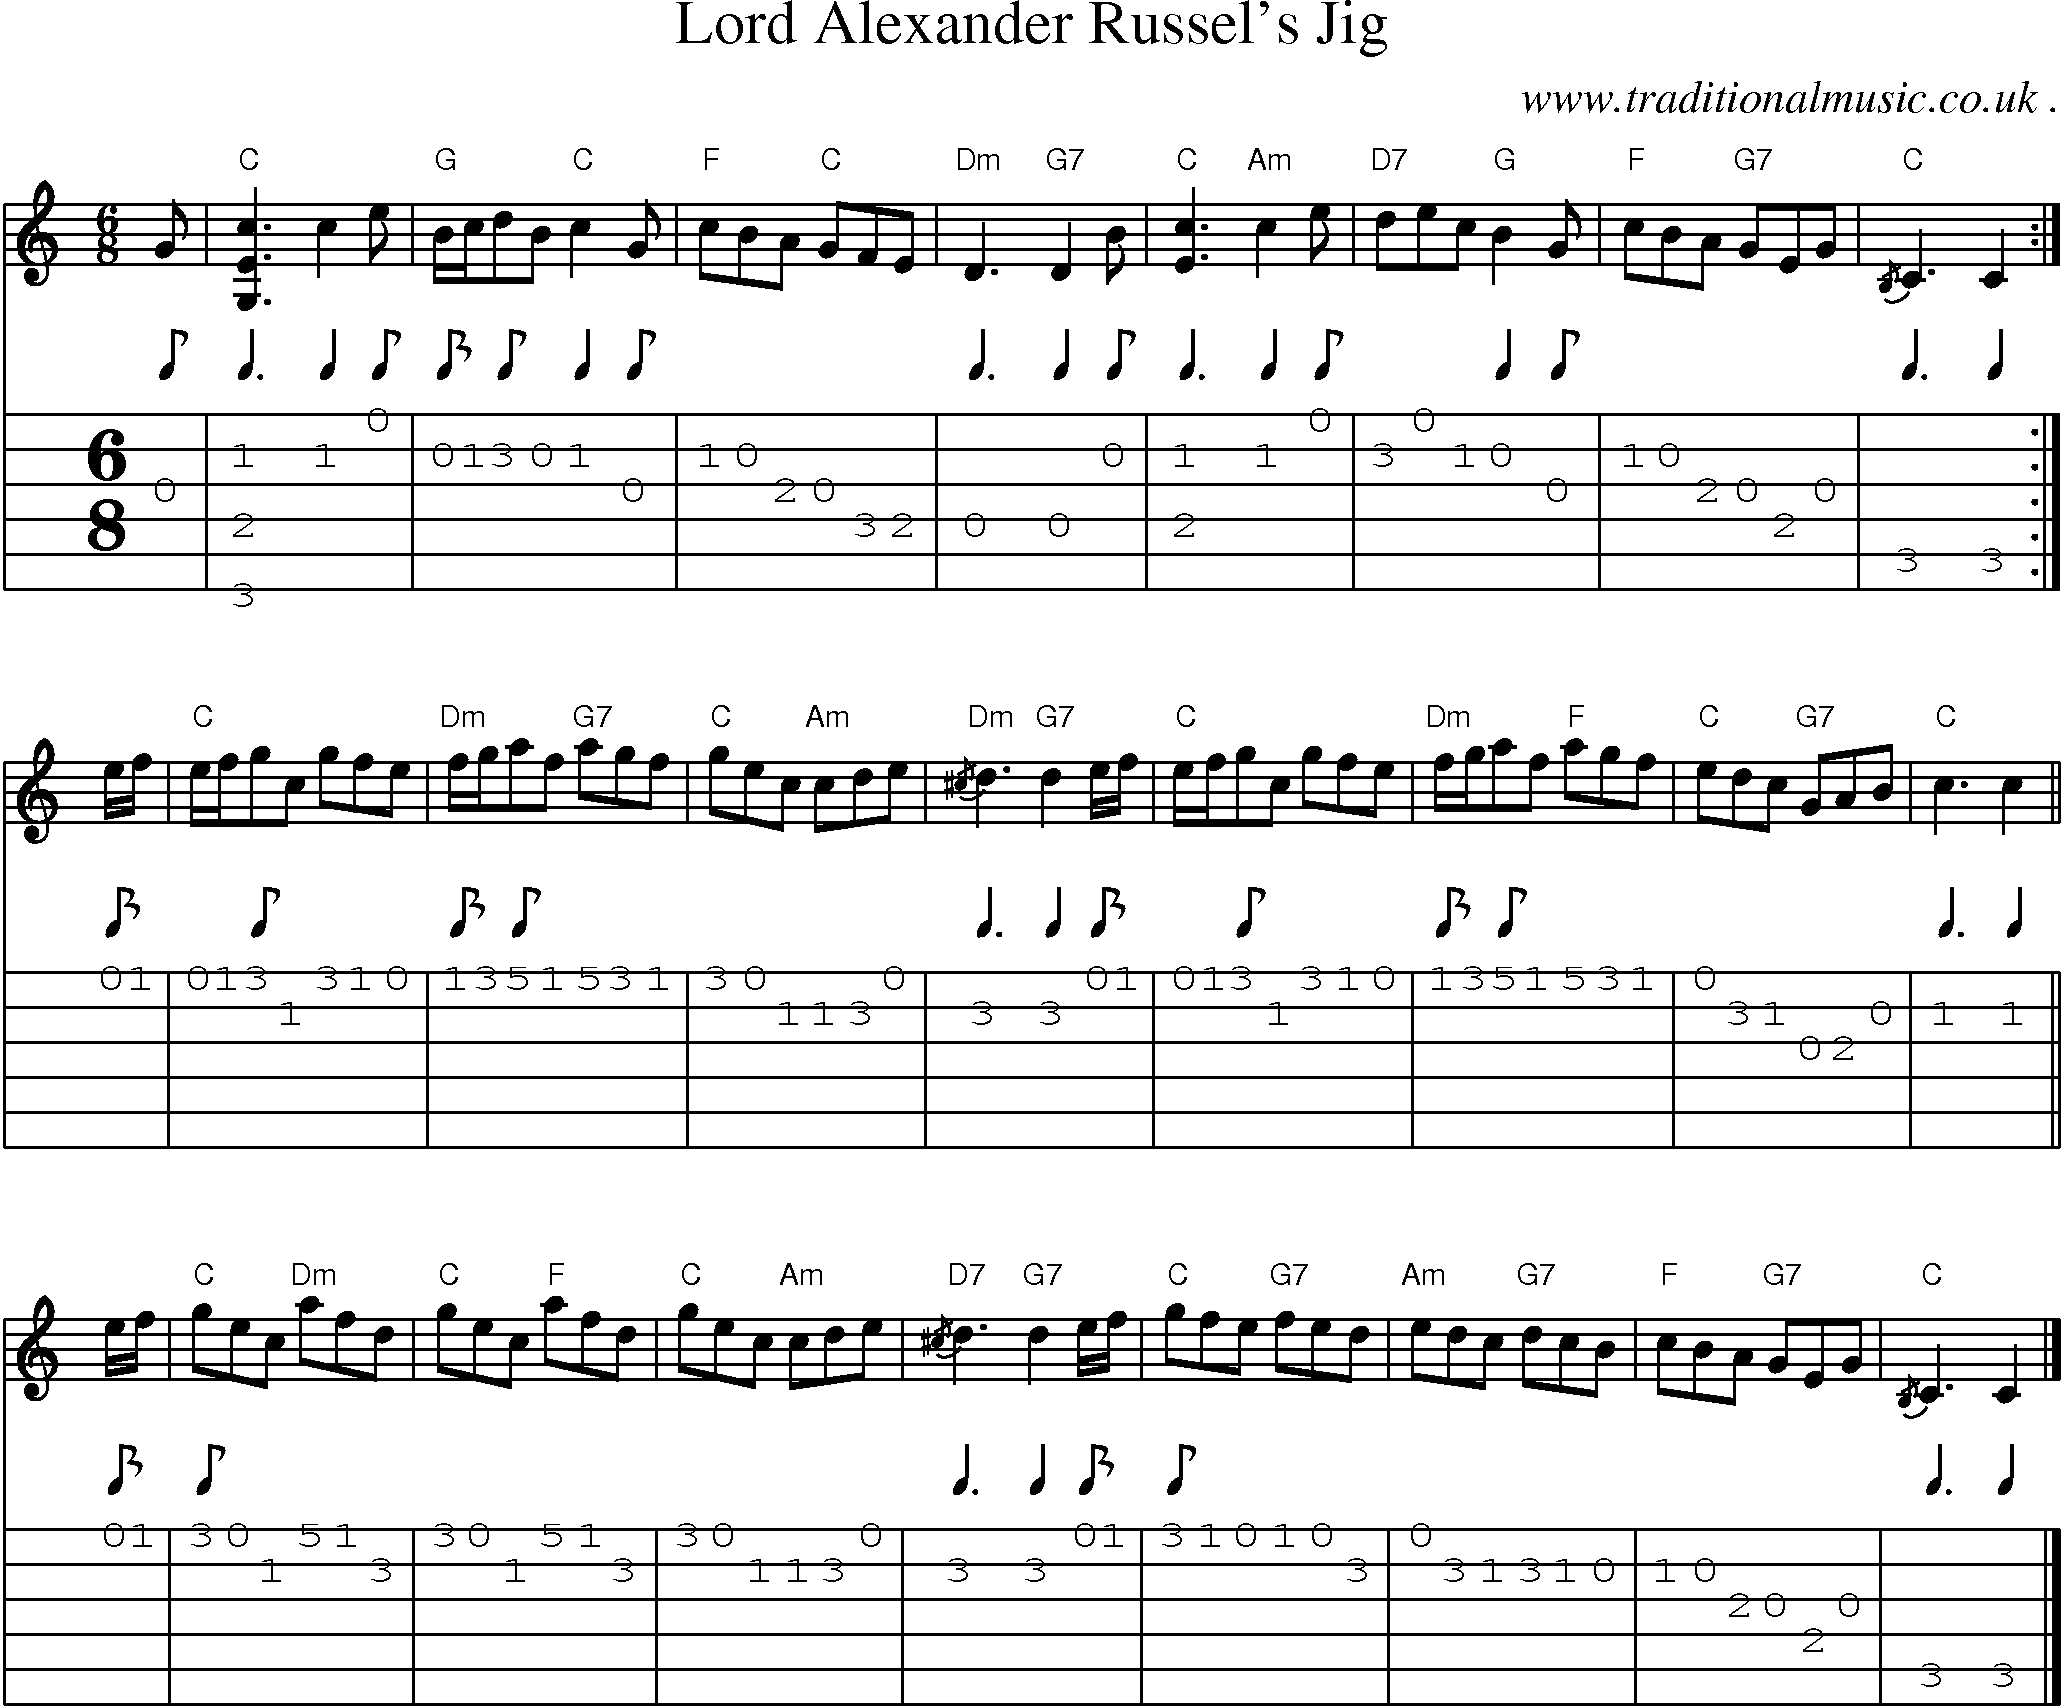 Sheet-music  score, Chords and Guitar Tabs for Lord Alexander Russels Jig